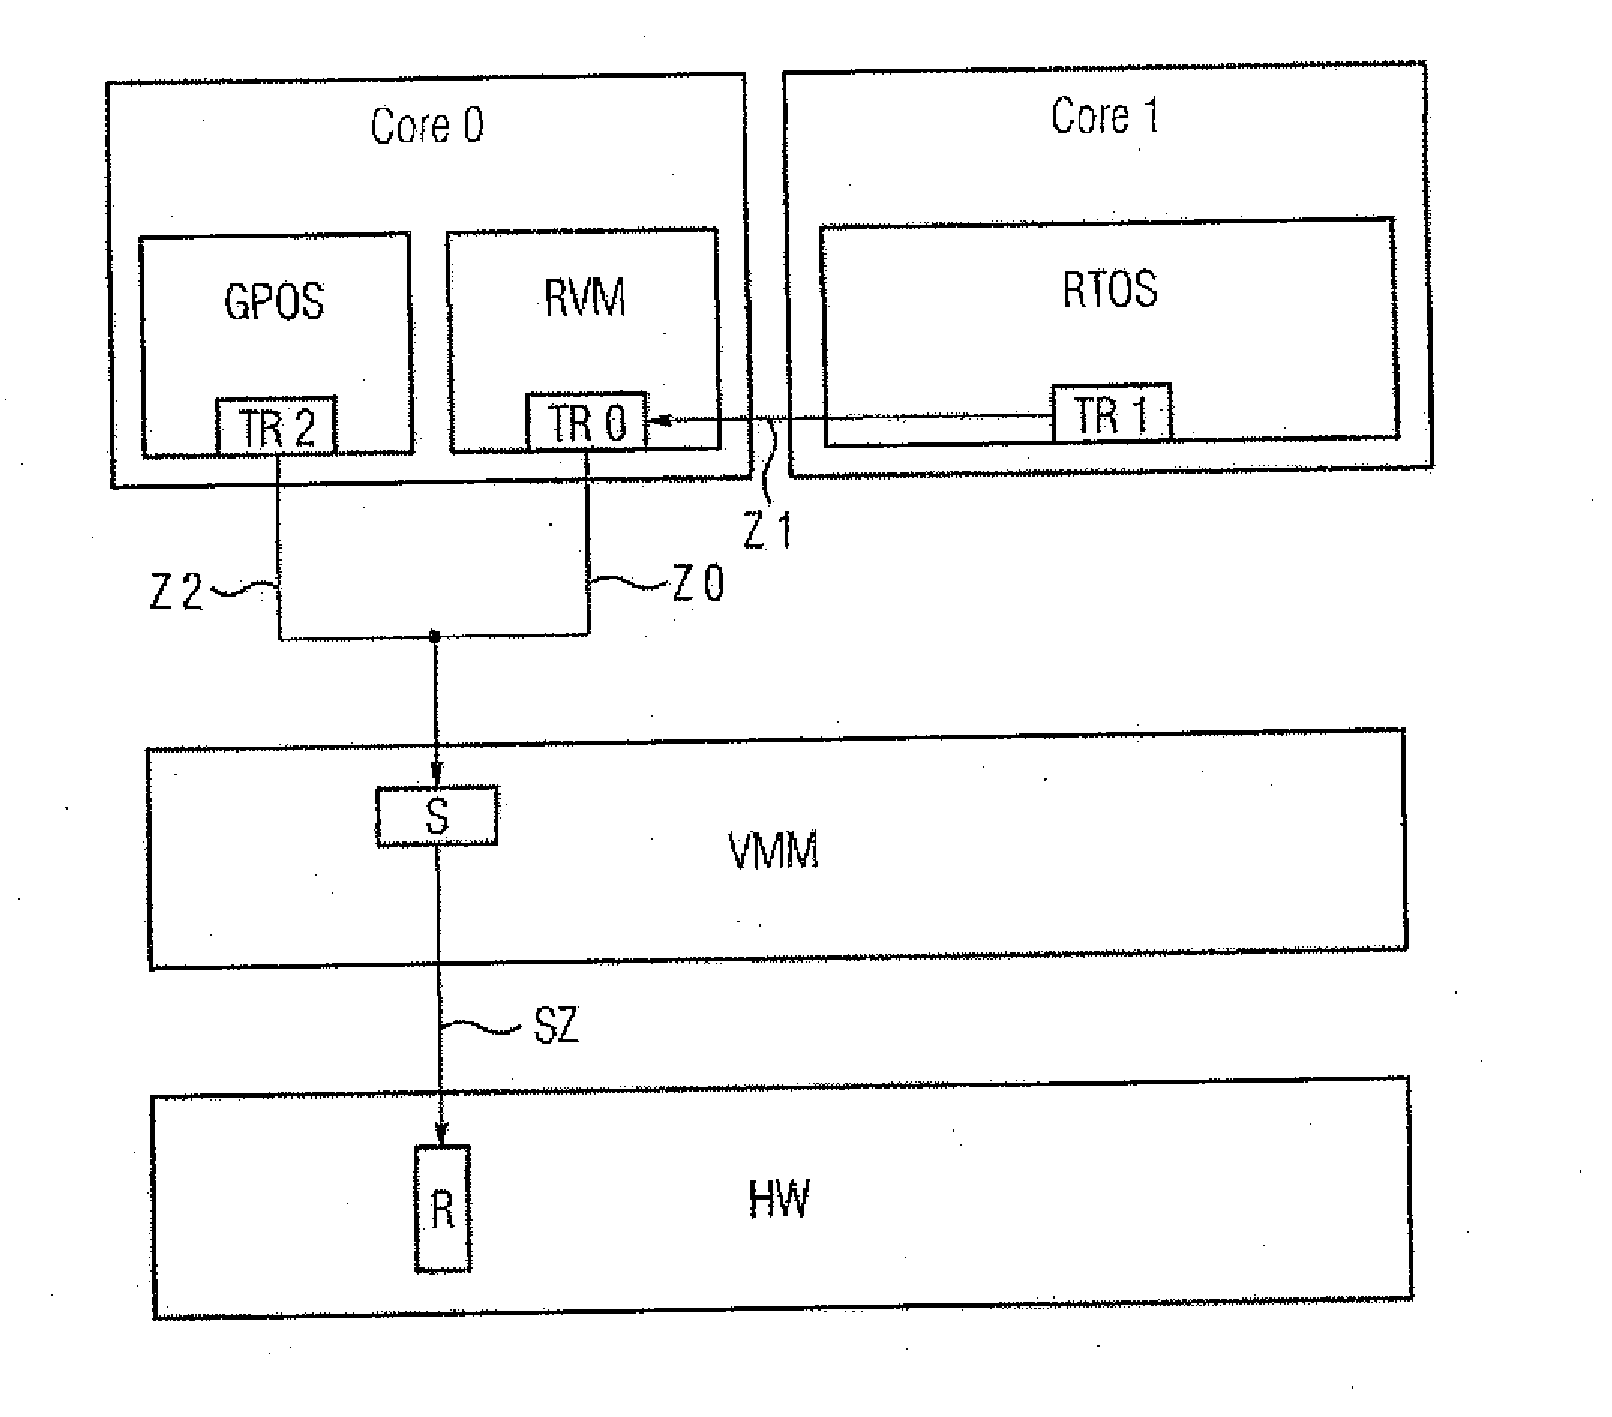 Method and Arrangement for Using a Resource of a Hardware Platform with at Least Two Virtual Machines